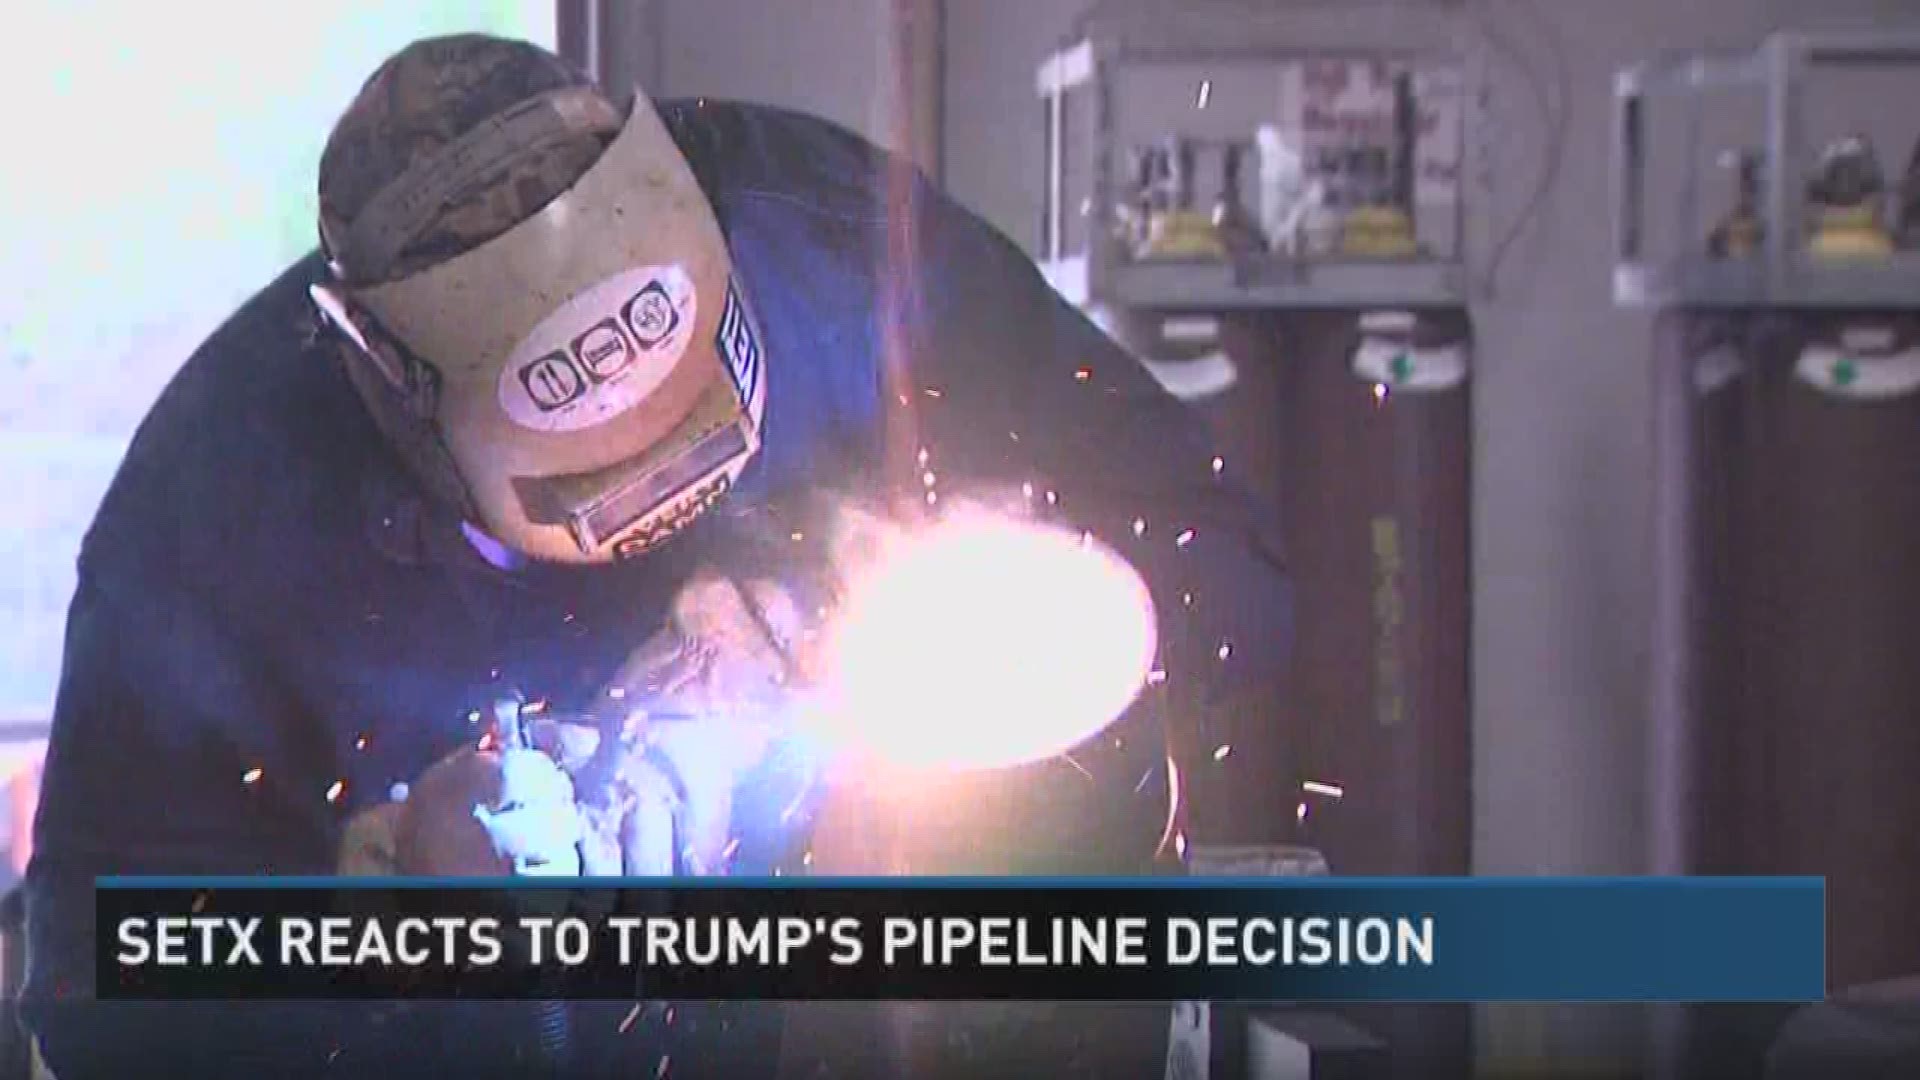 Local welders and prospective pipefitters hope that construction the Keystone Pipeline will create jobs locally